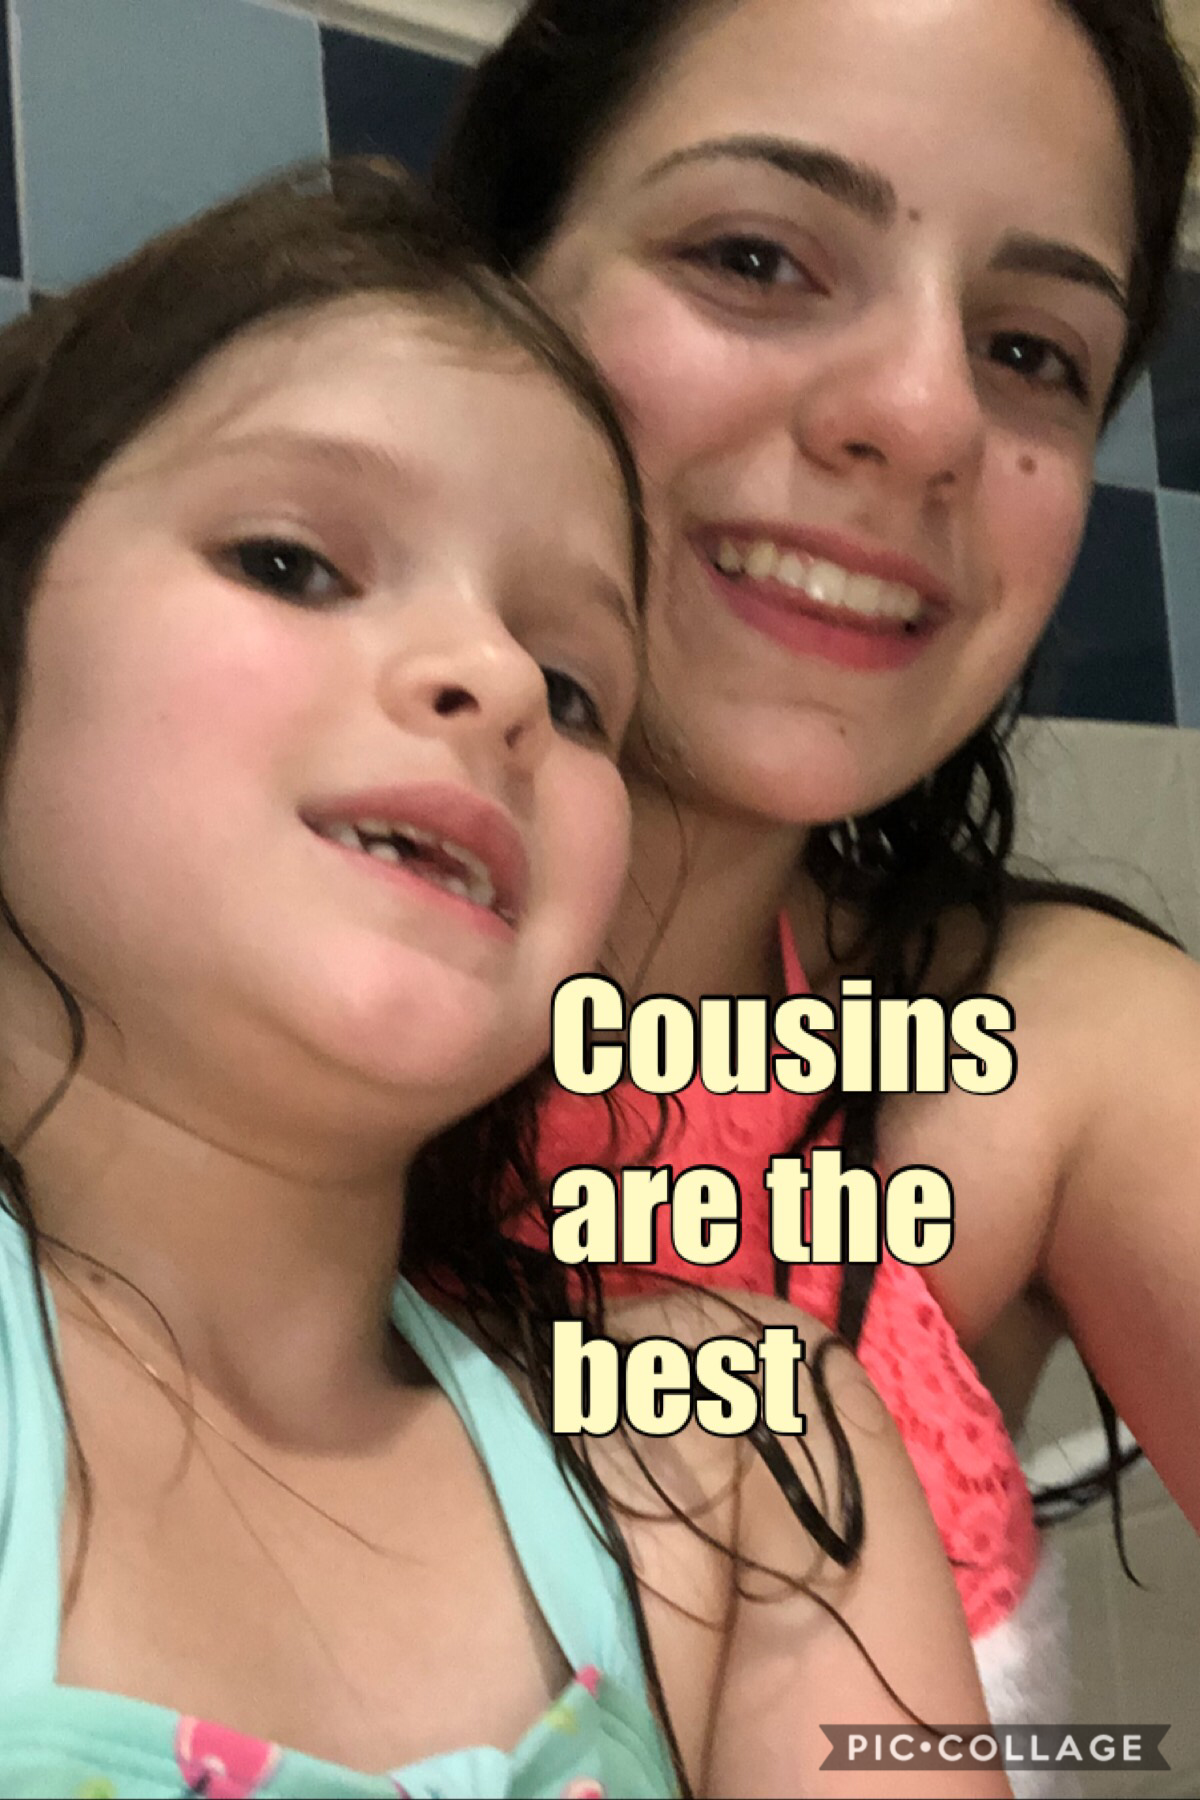 Cousins are really the best